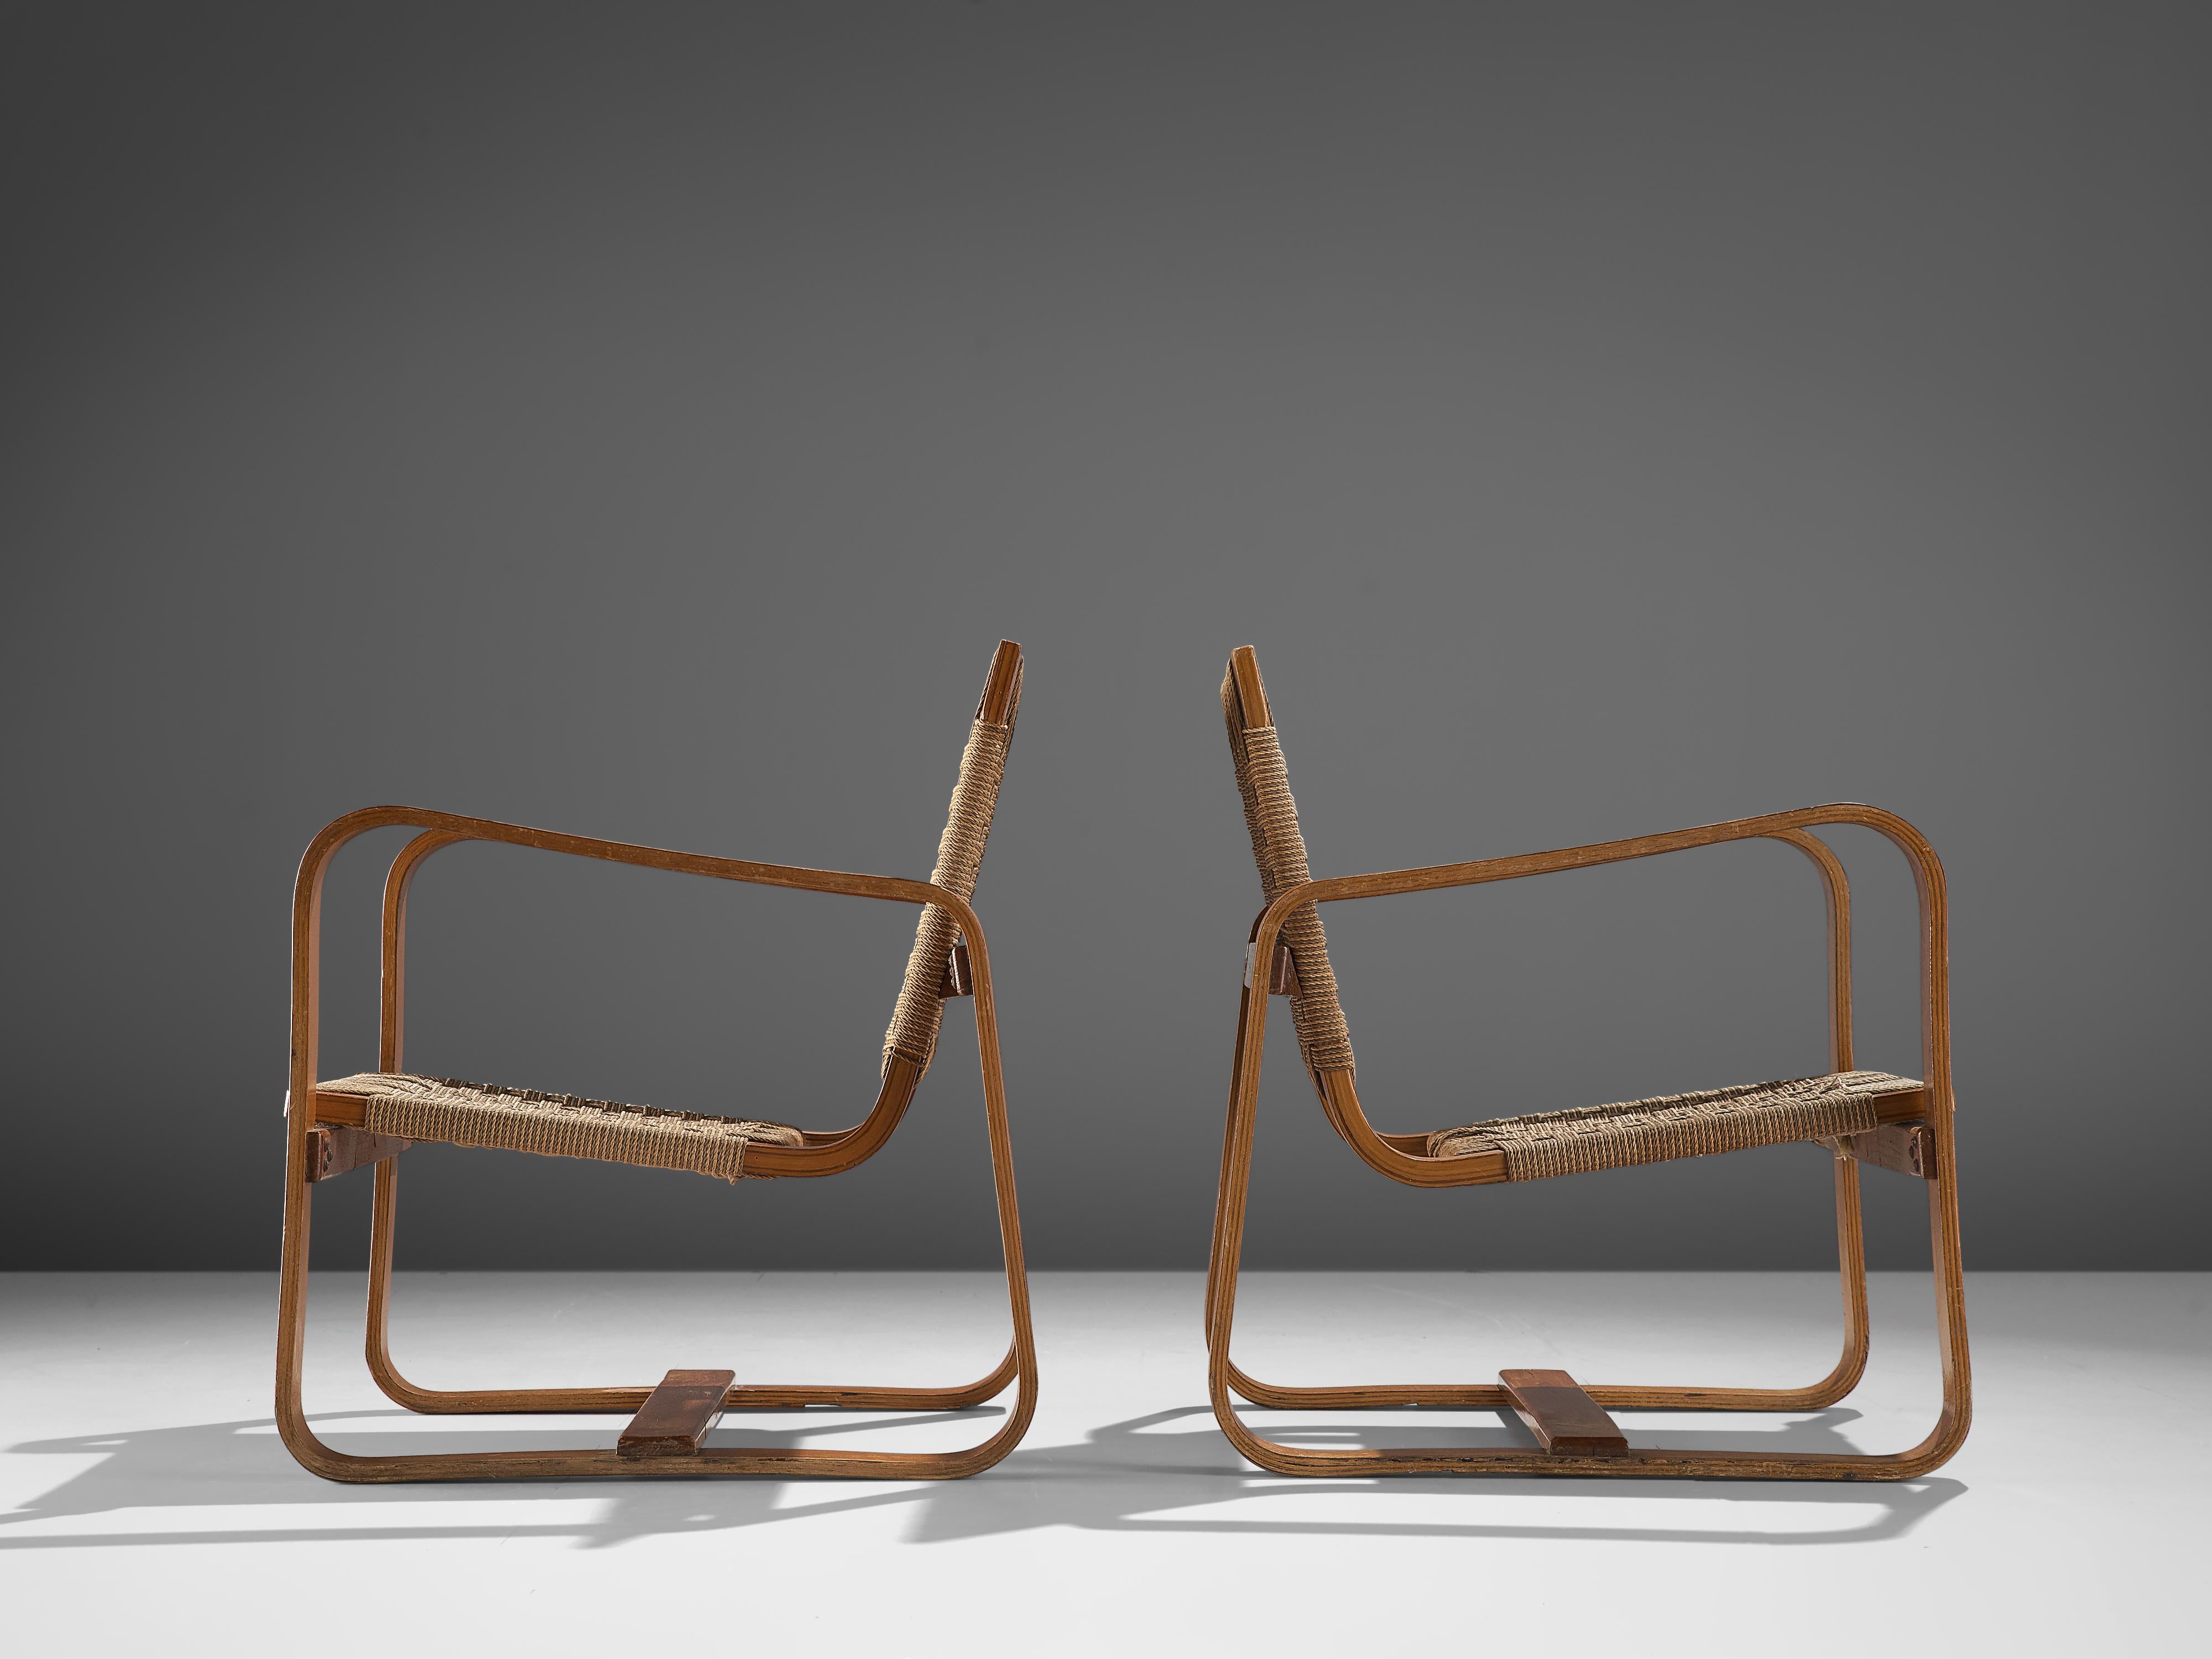 Giuseppe Pagano Pogatschnig Pair of Bentwood Lounge Chairs, 1940s 1